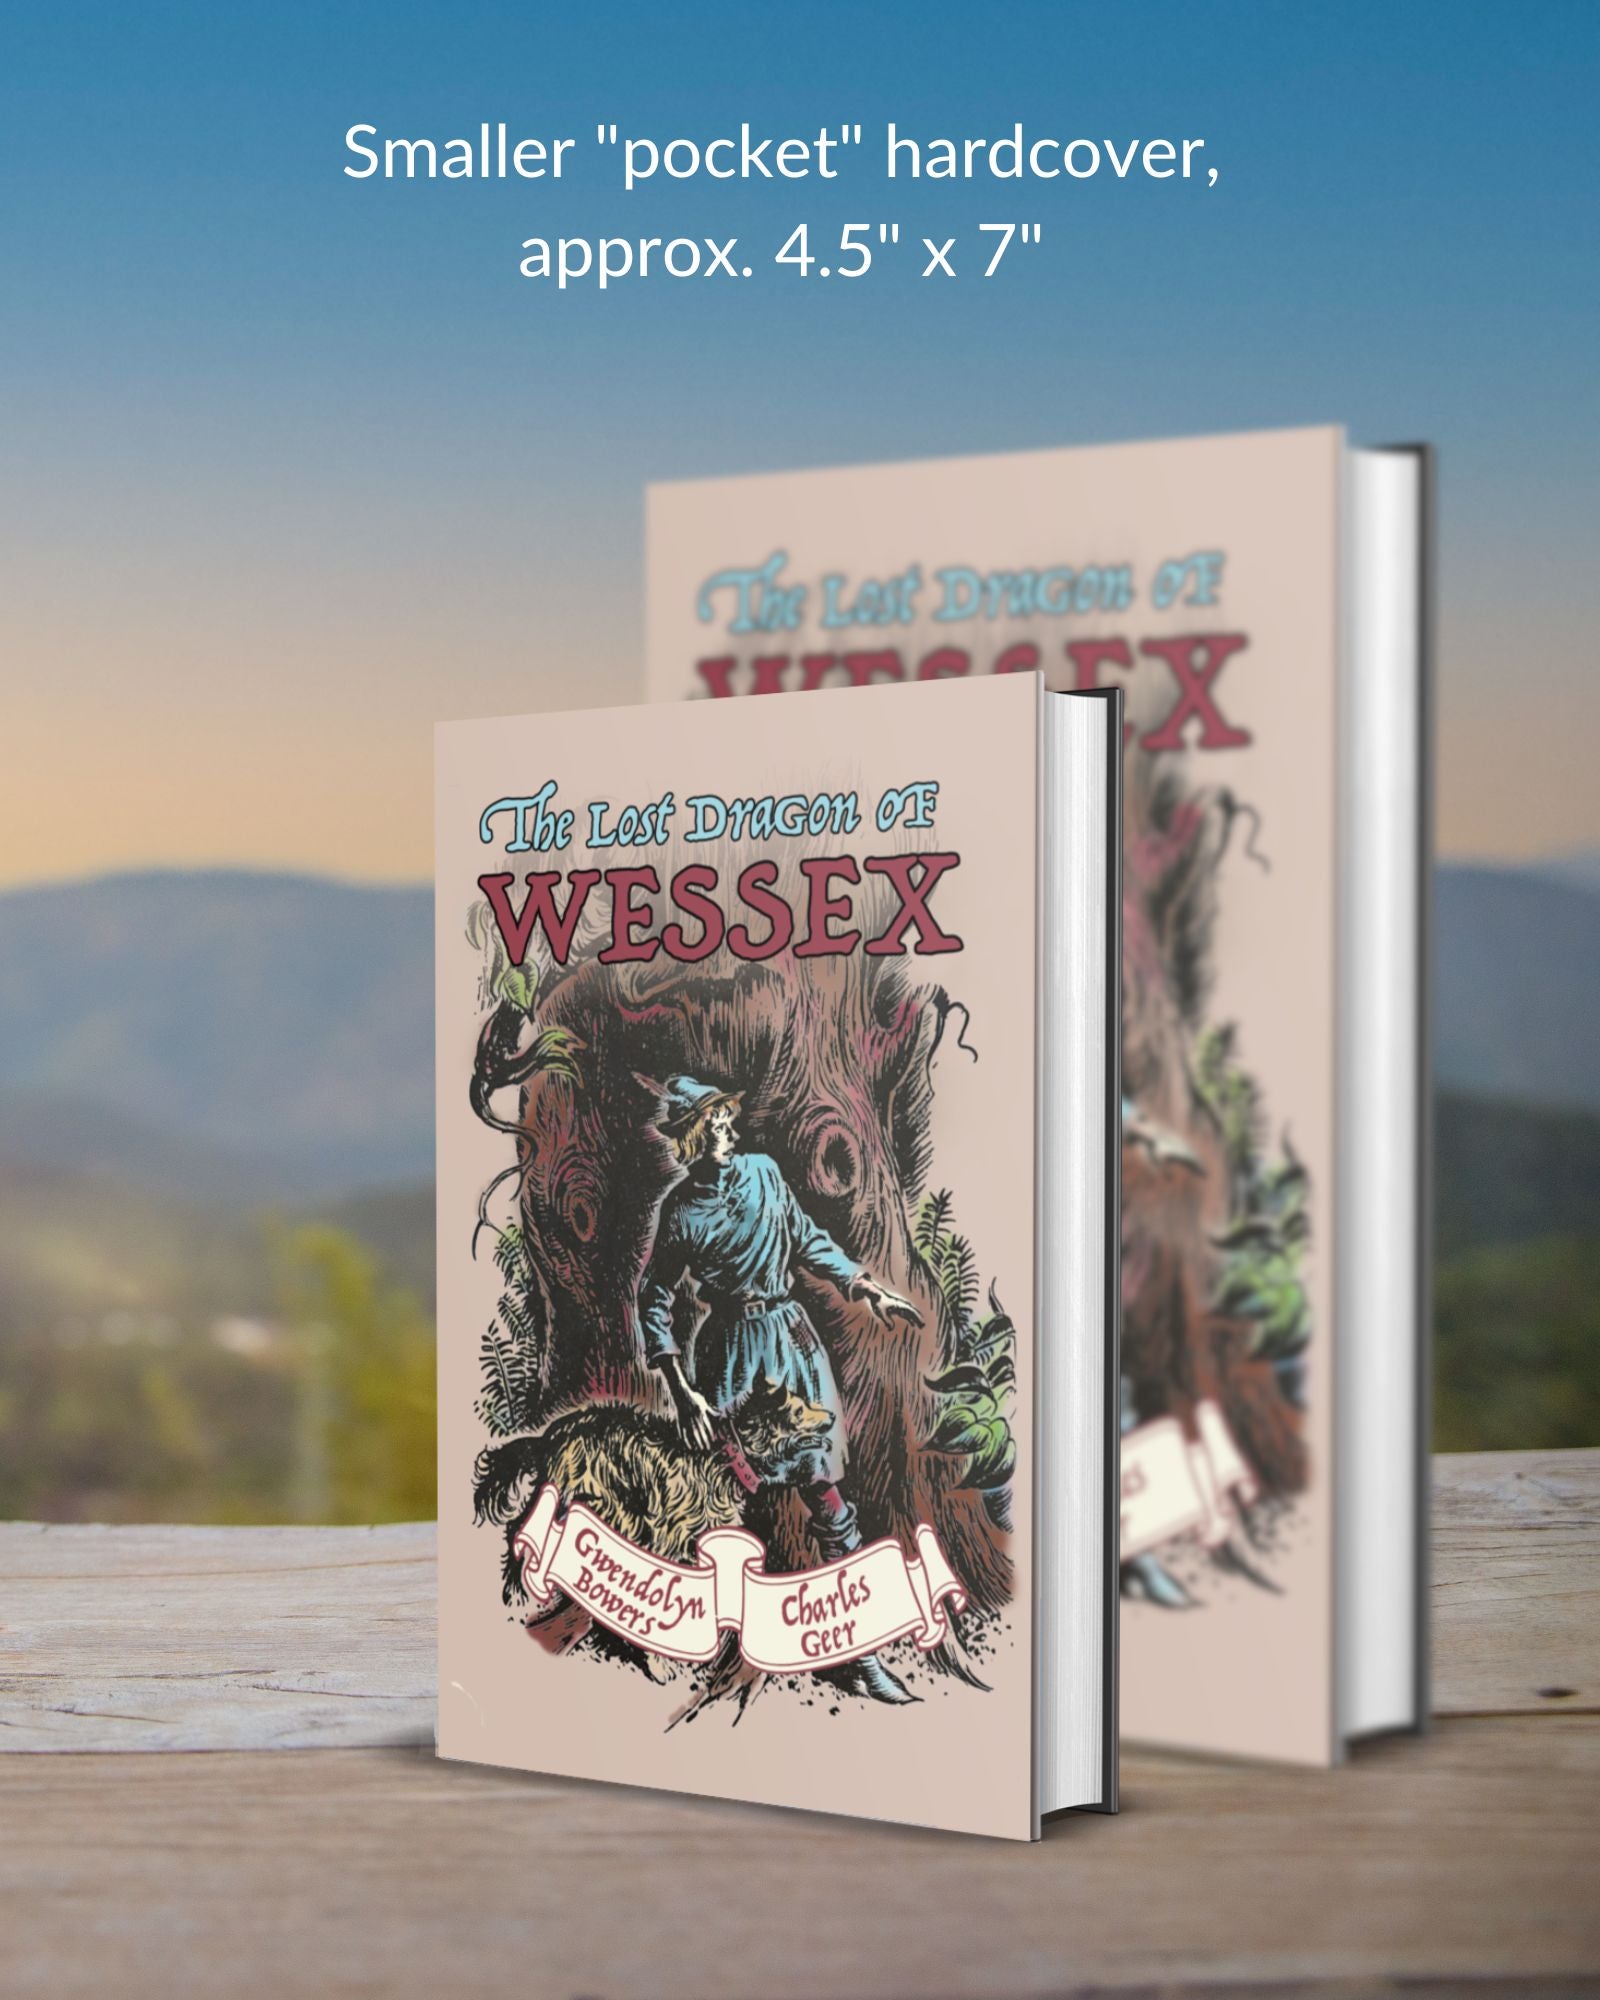 Cute small hardcover of The Lost Dragon of Wessex, a historical English fiction novel by Gwendolyn Bowers, illustrated by Charles Geer, published by Smidgen Press